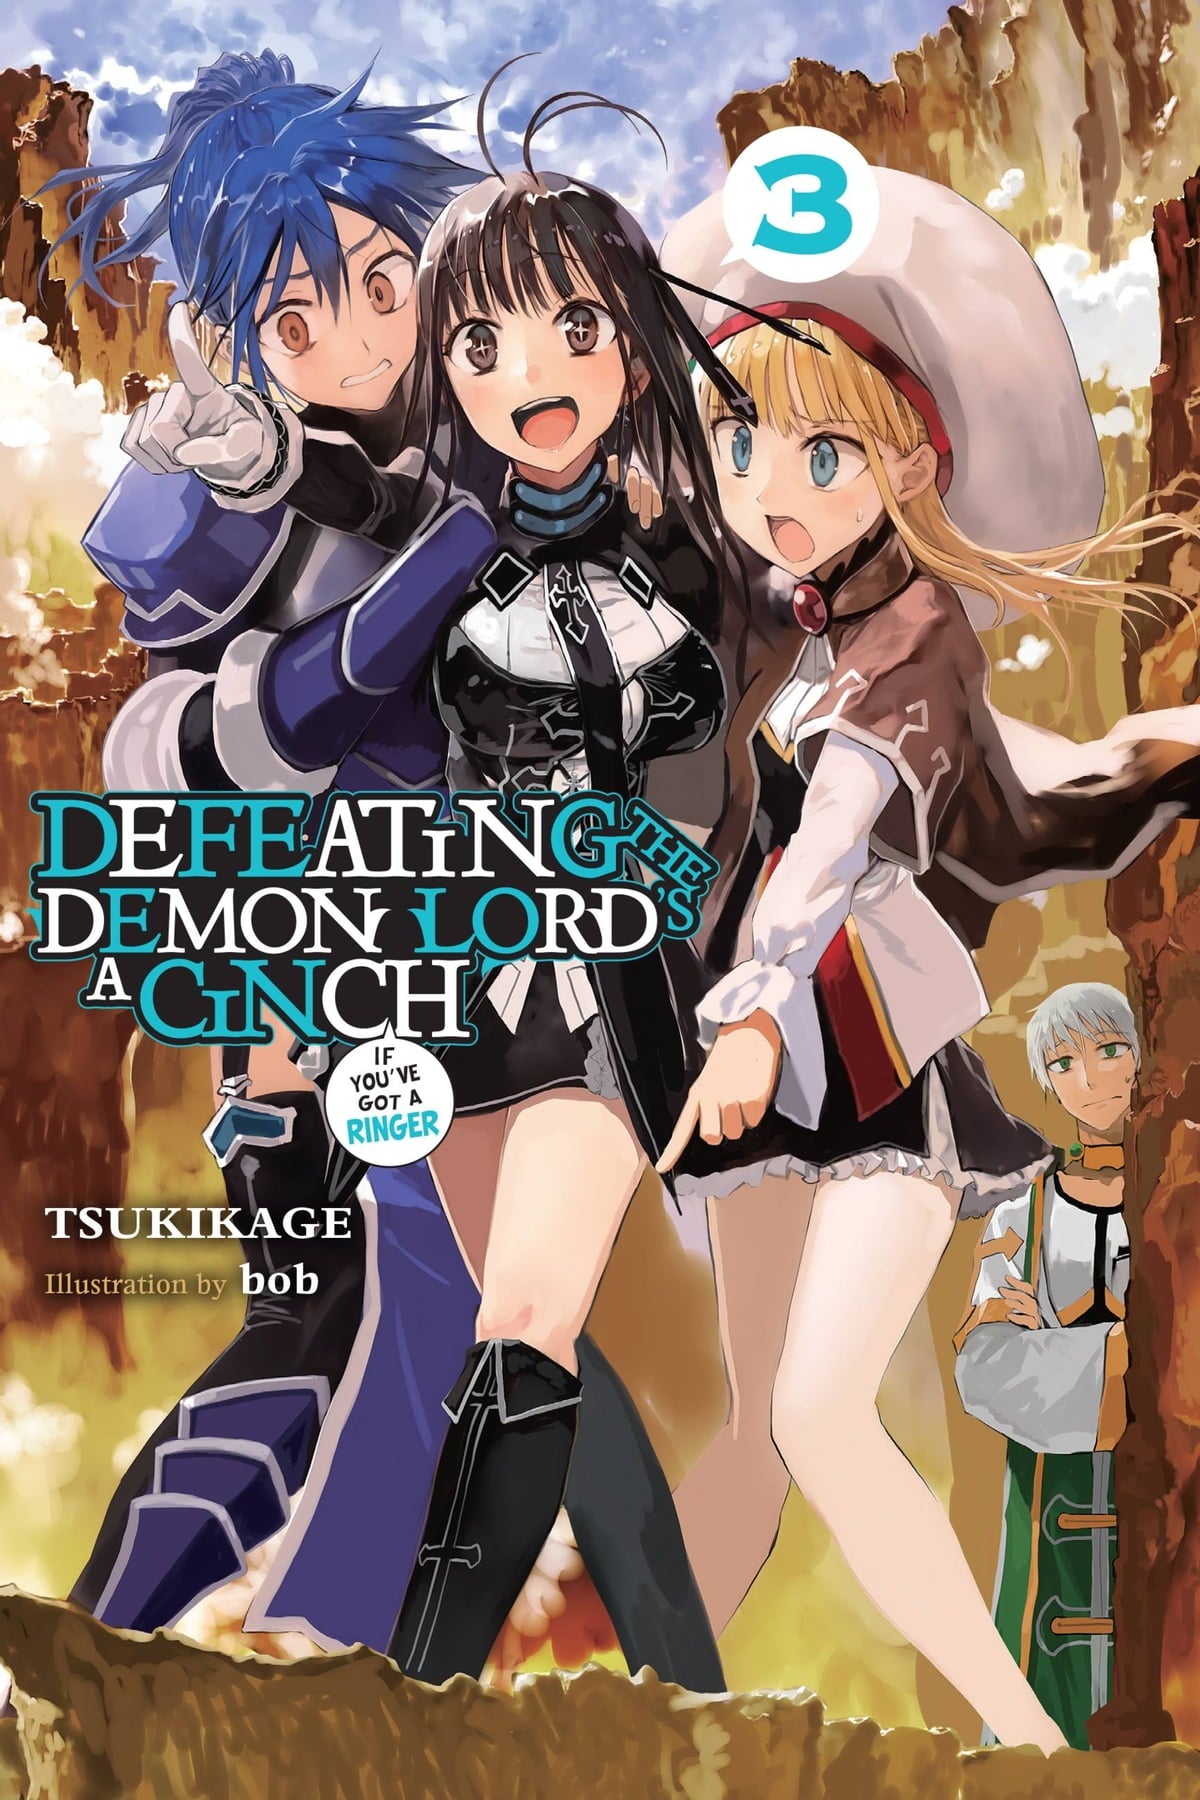 Defeating the Demon Lord's a Cinch (If You've Got a Ringer) Vol. 03